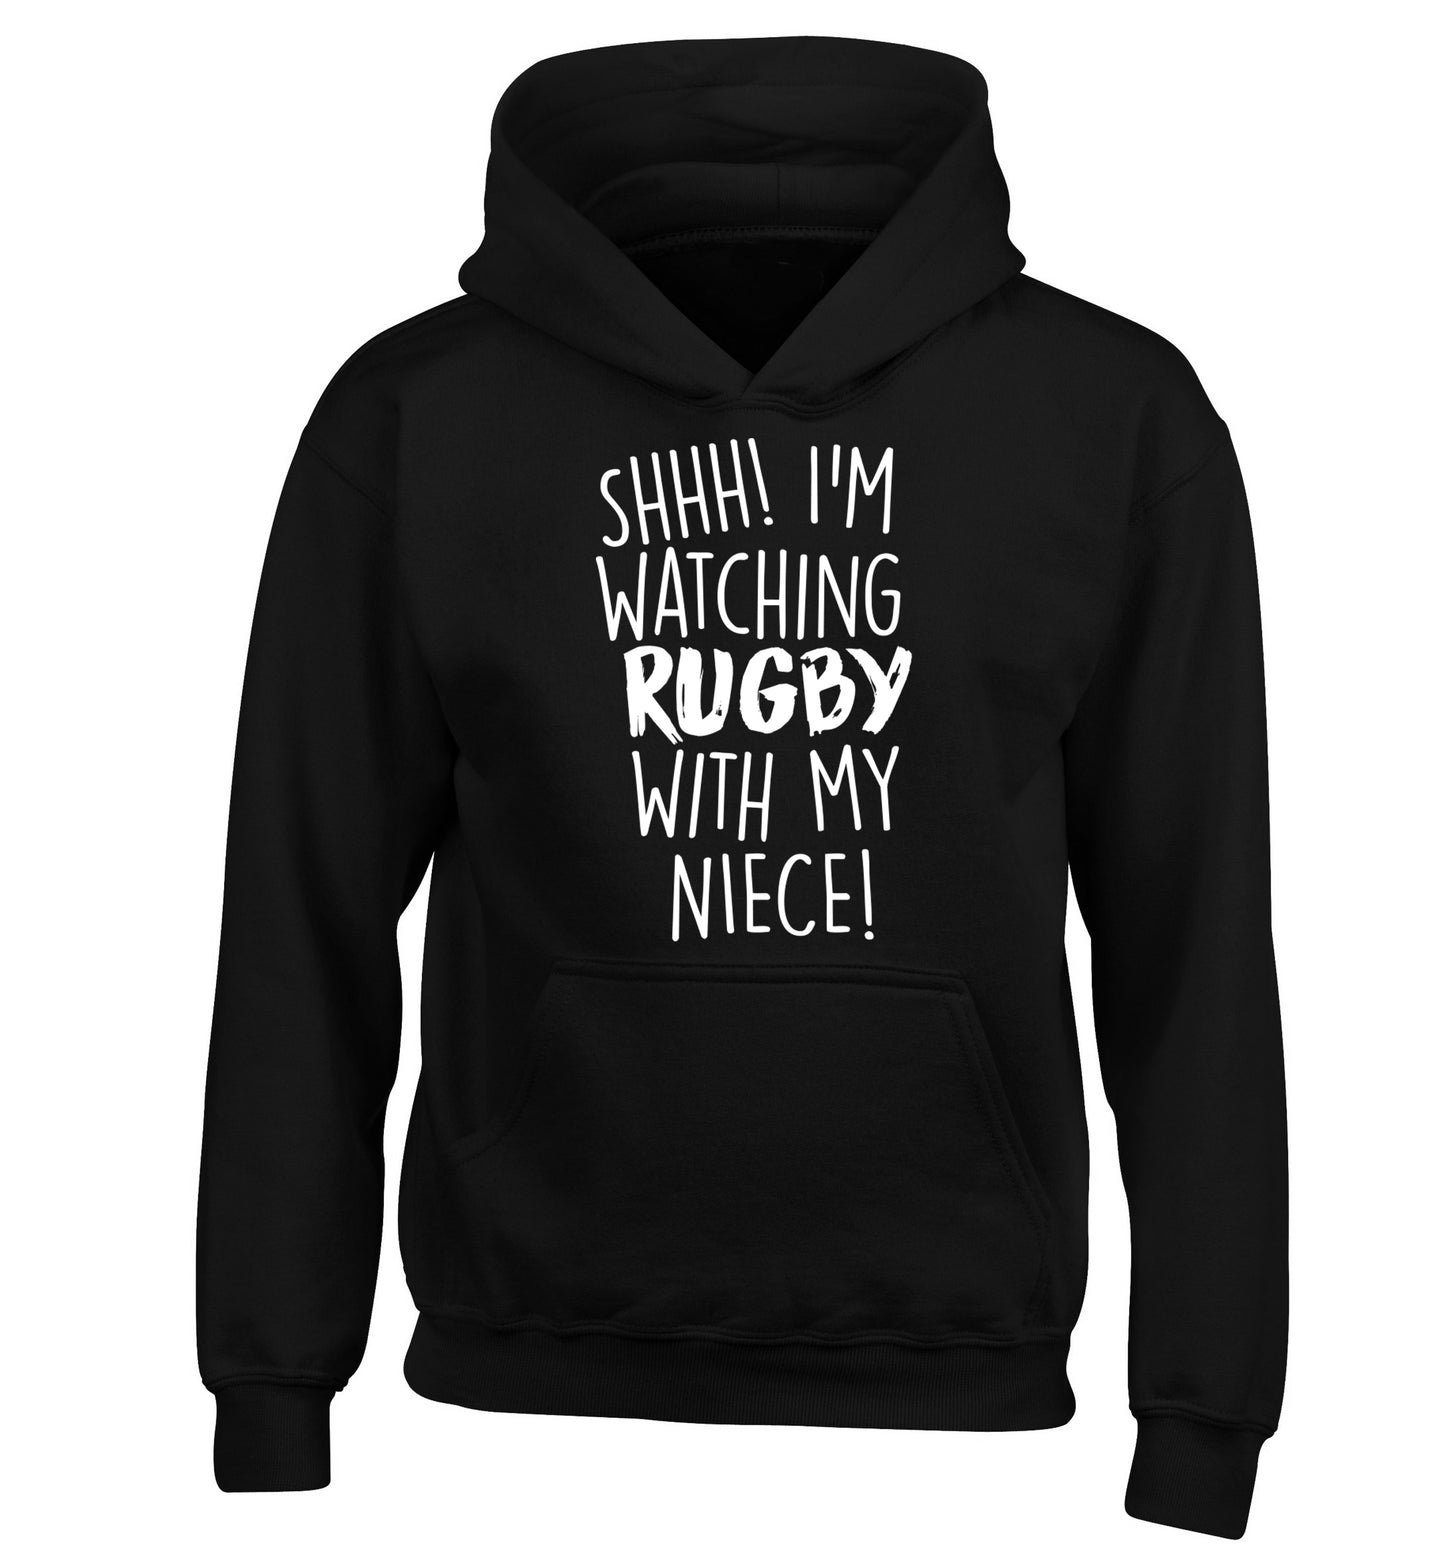 Shh.. I'm watching rugby with my niece children's black hoodie 12-13 Years